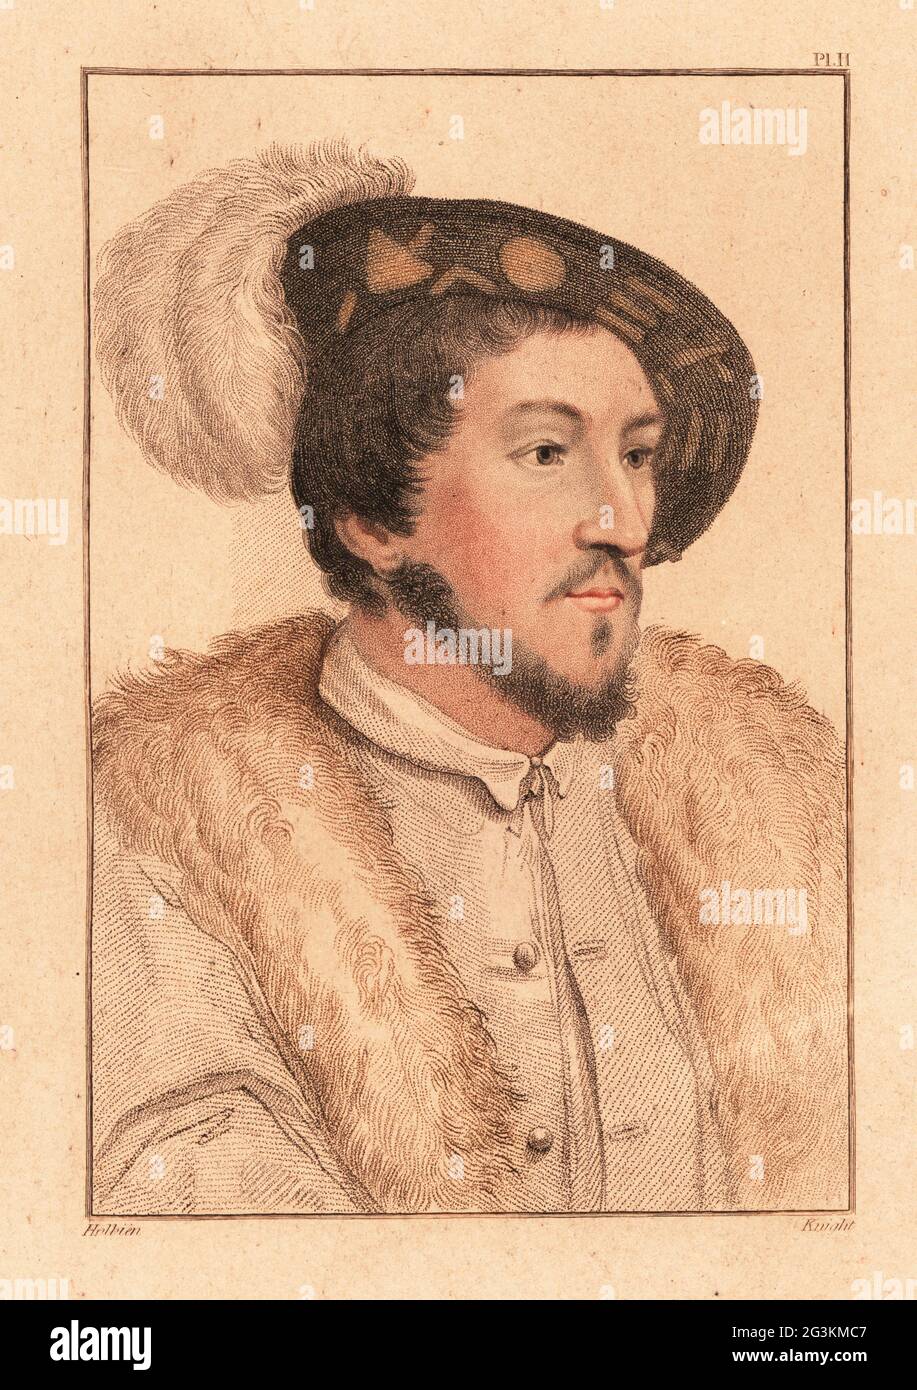 Portrait of an unknown man, court of King Henry VIII, c. 1532.  Possibly John Dudley, 1st Duke of Northumberland, who tried to install Lady Jane Grey as Queen. Handcoloured copperplate stipple engraving by Charles Knight after a portrait by Hans Holbein the Younger from Imitations of Original Drawings by Hans Holbein, John Chamberlaine, London, 1812. Stock Photo